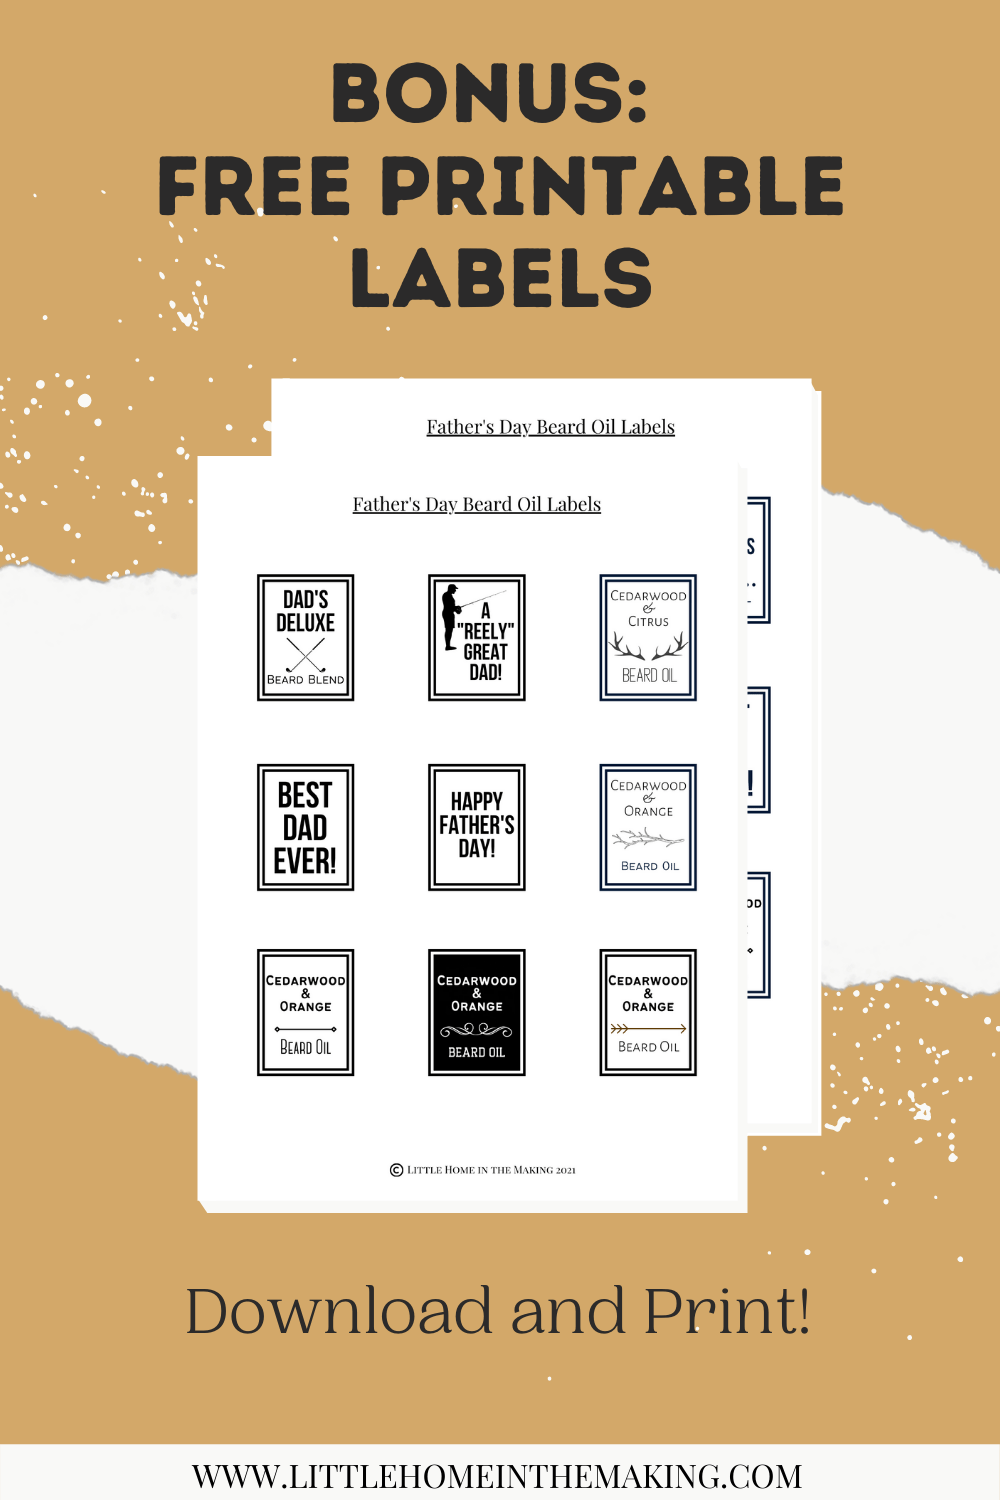 The text reads: Bonus: Free Printable Labels and includes a view of a page of various labels for Father's Day Beard Oil.